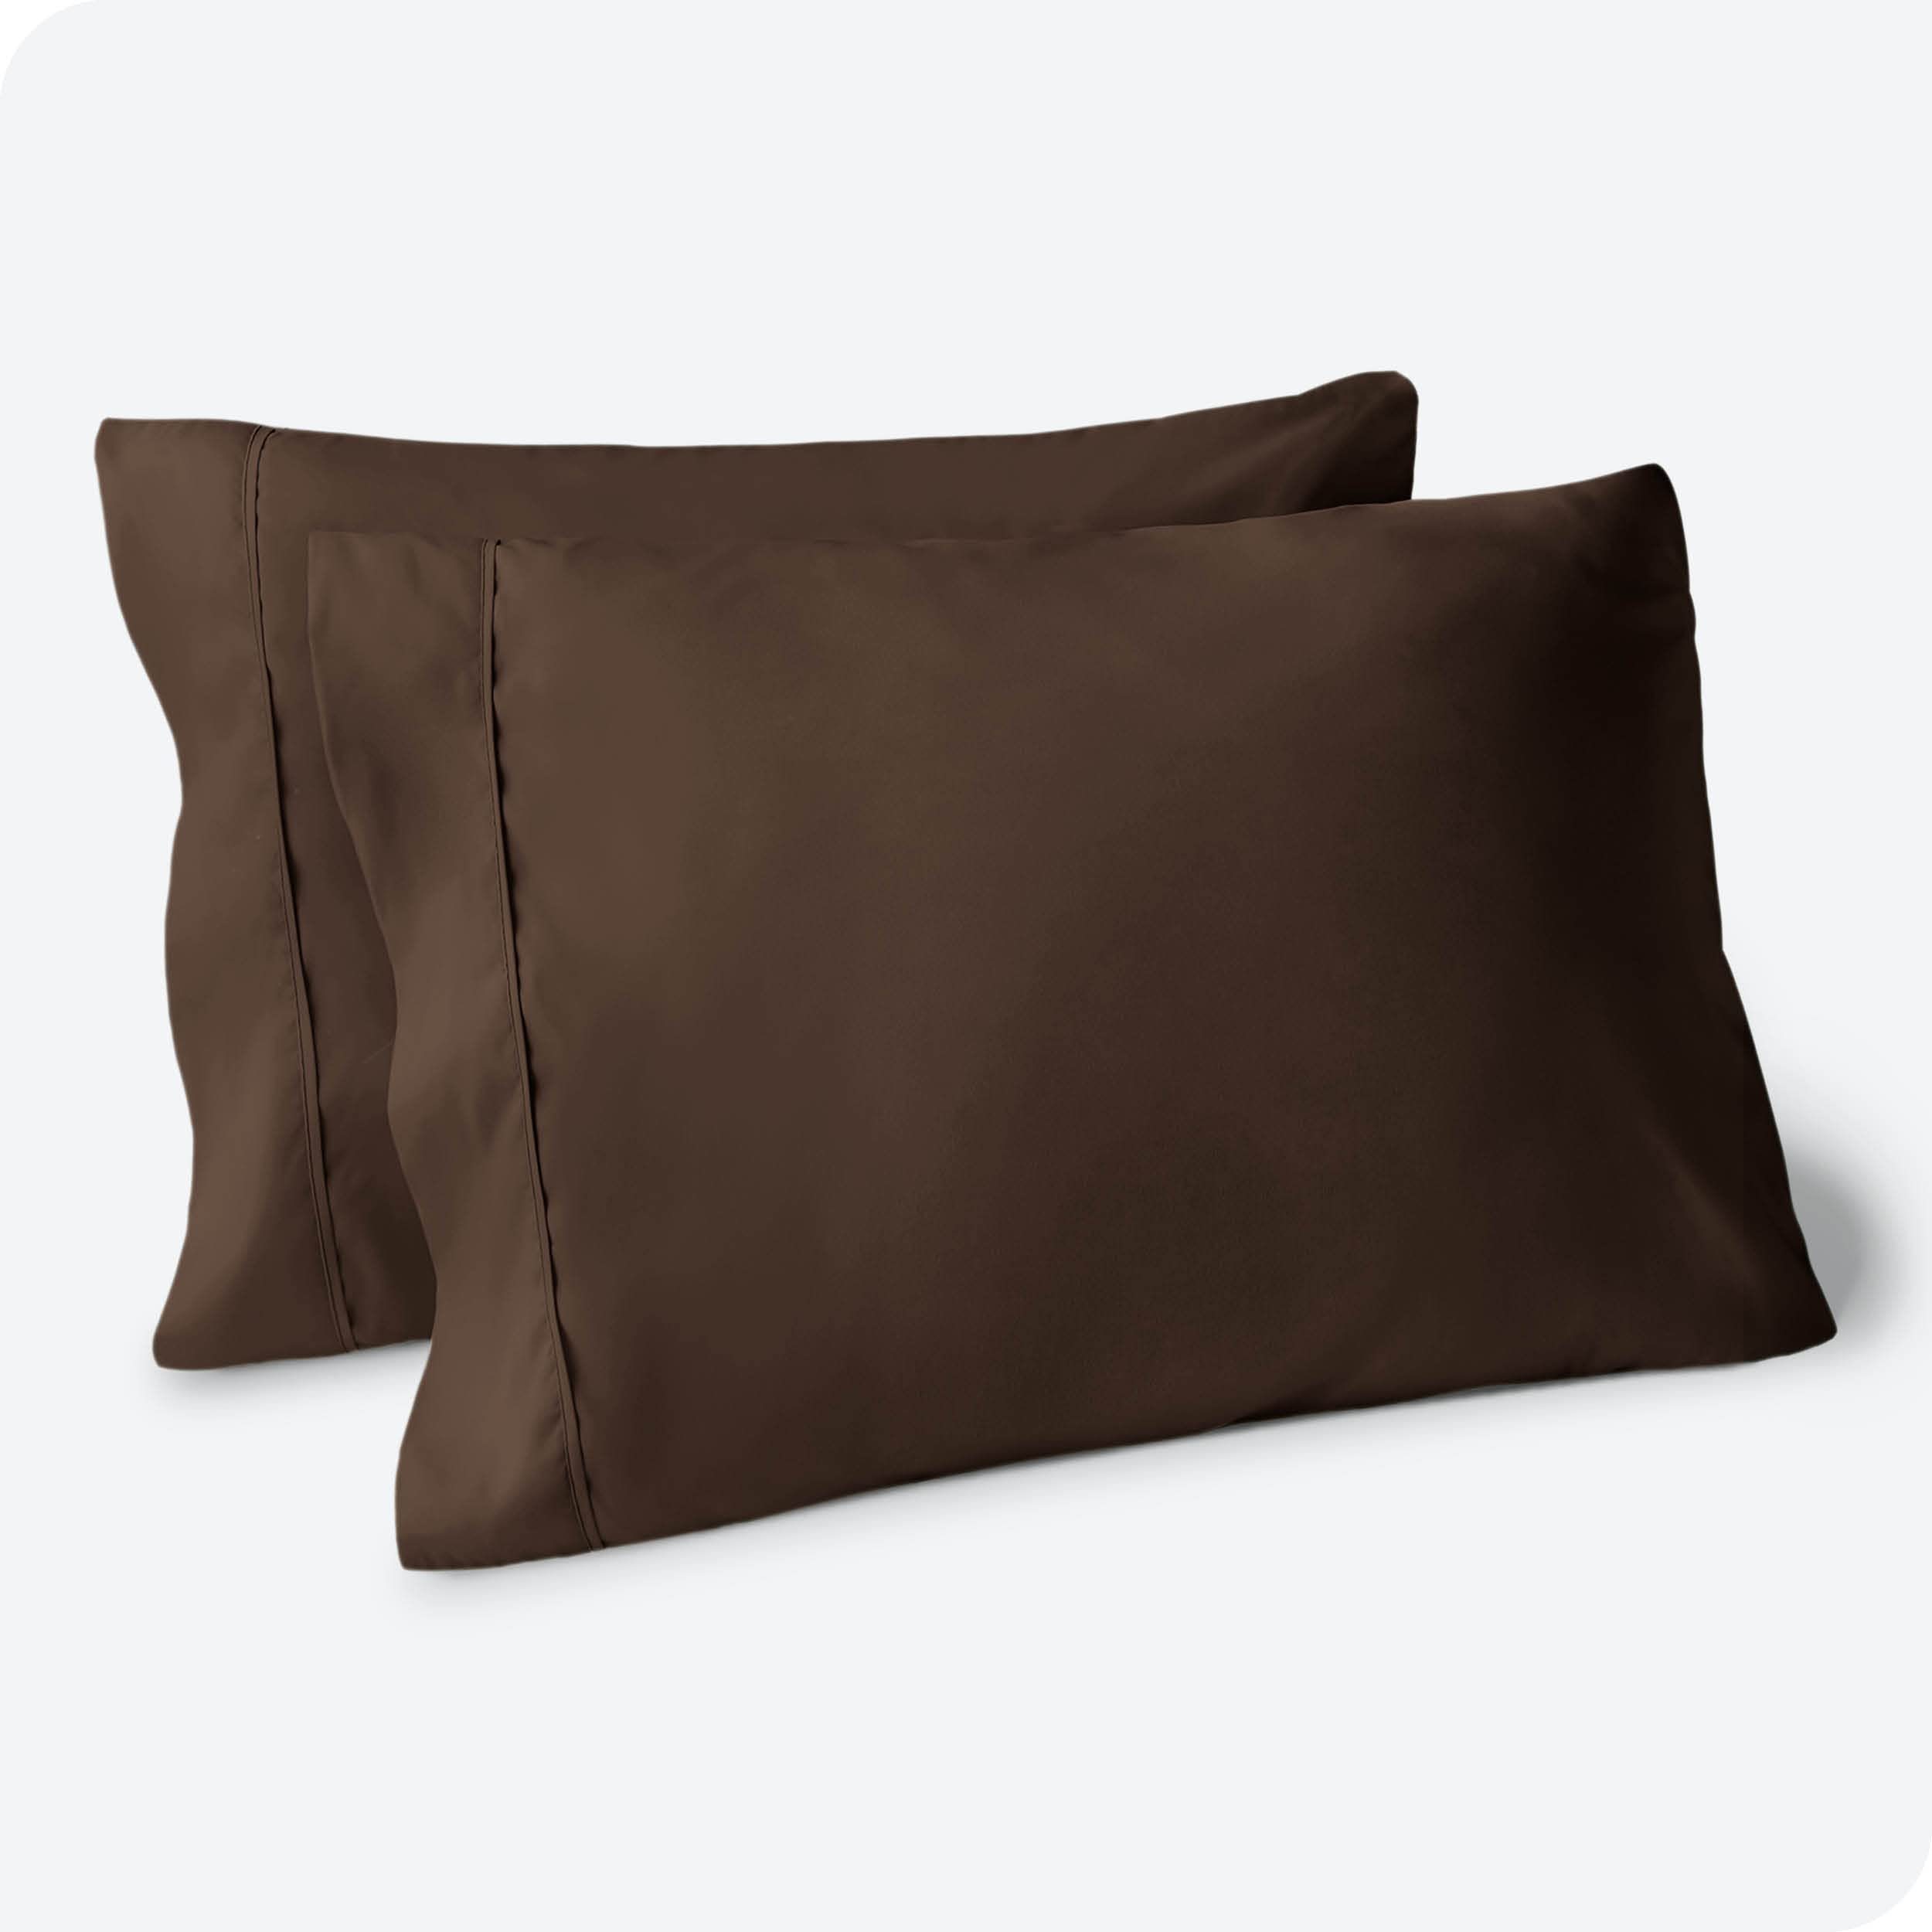 Book Cover Bare Home Premium 1800 Ultra-Soft Microfiber Pillowcase Set - Double Brushed - Hypoallergenic - Wrinkle Resistant (Standard Pillowcase Set of 2, Cocoa)